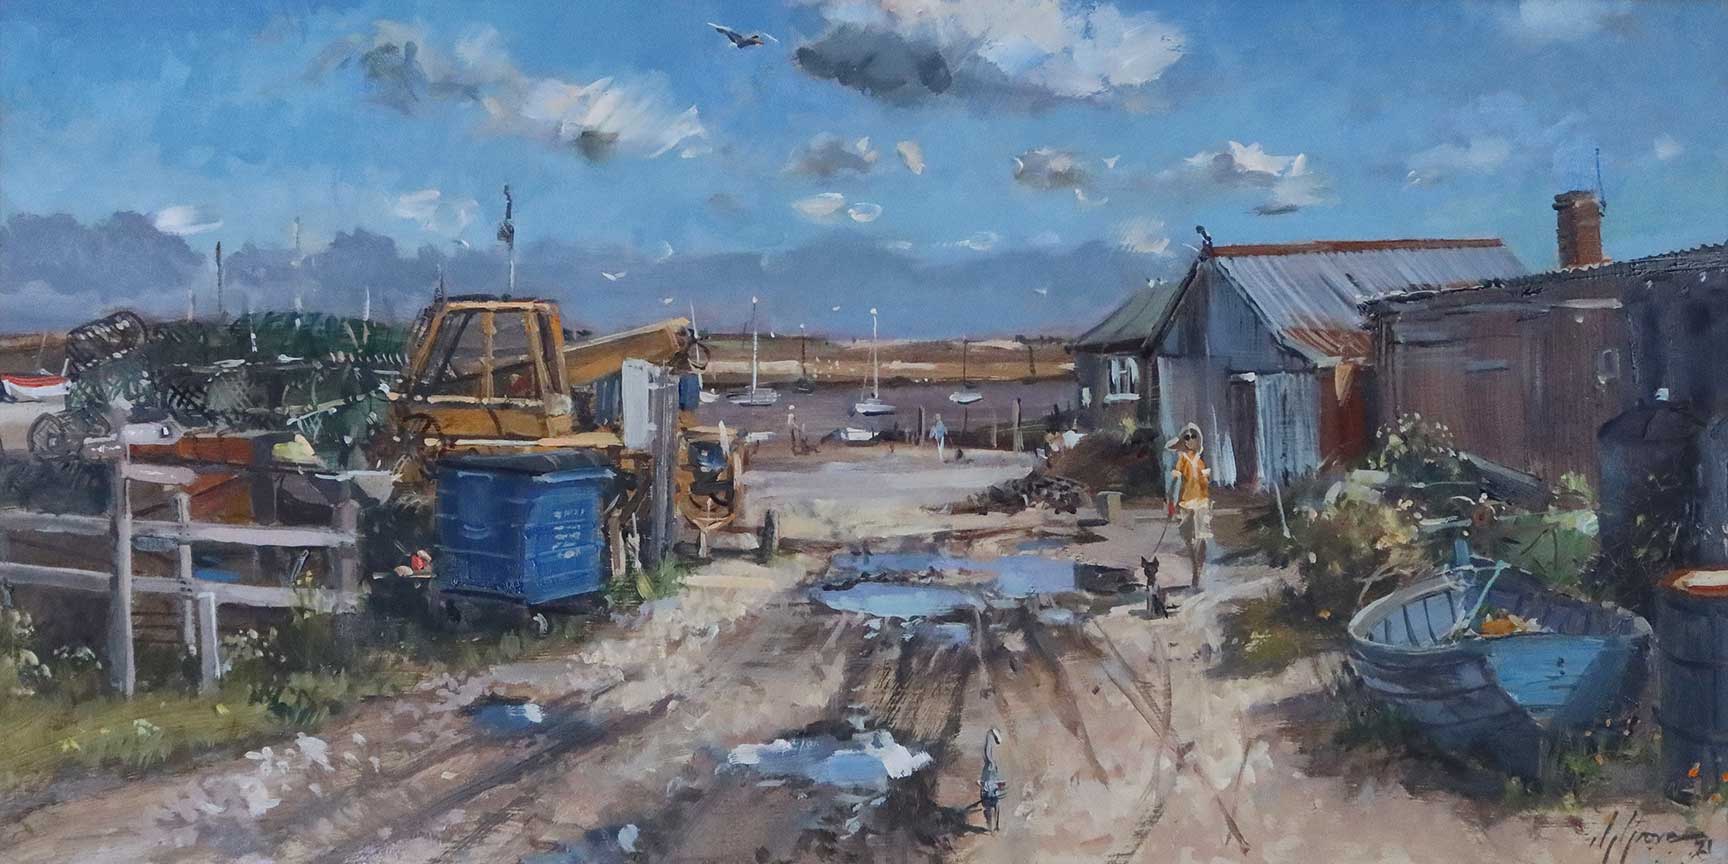 'The Proposal, Brancaster Overy Staithe', 12x24in, oil on board, painted in the summer of 2021.